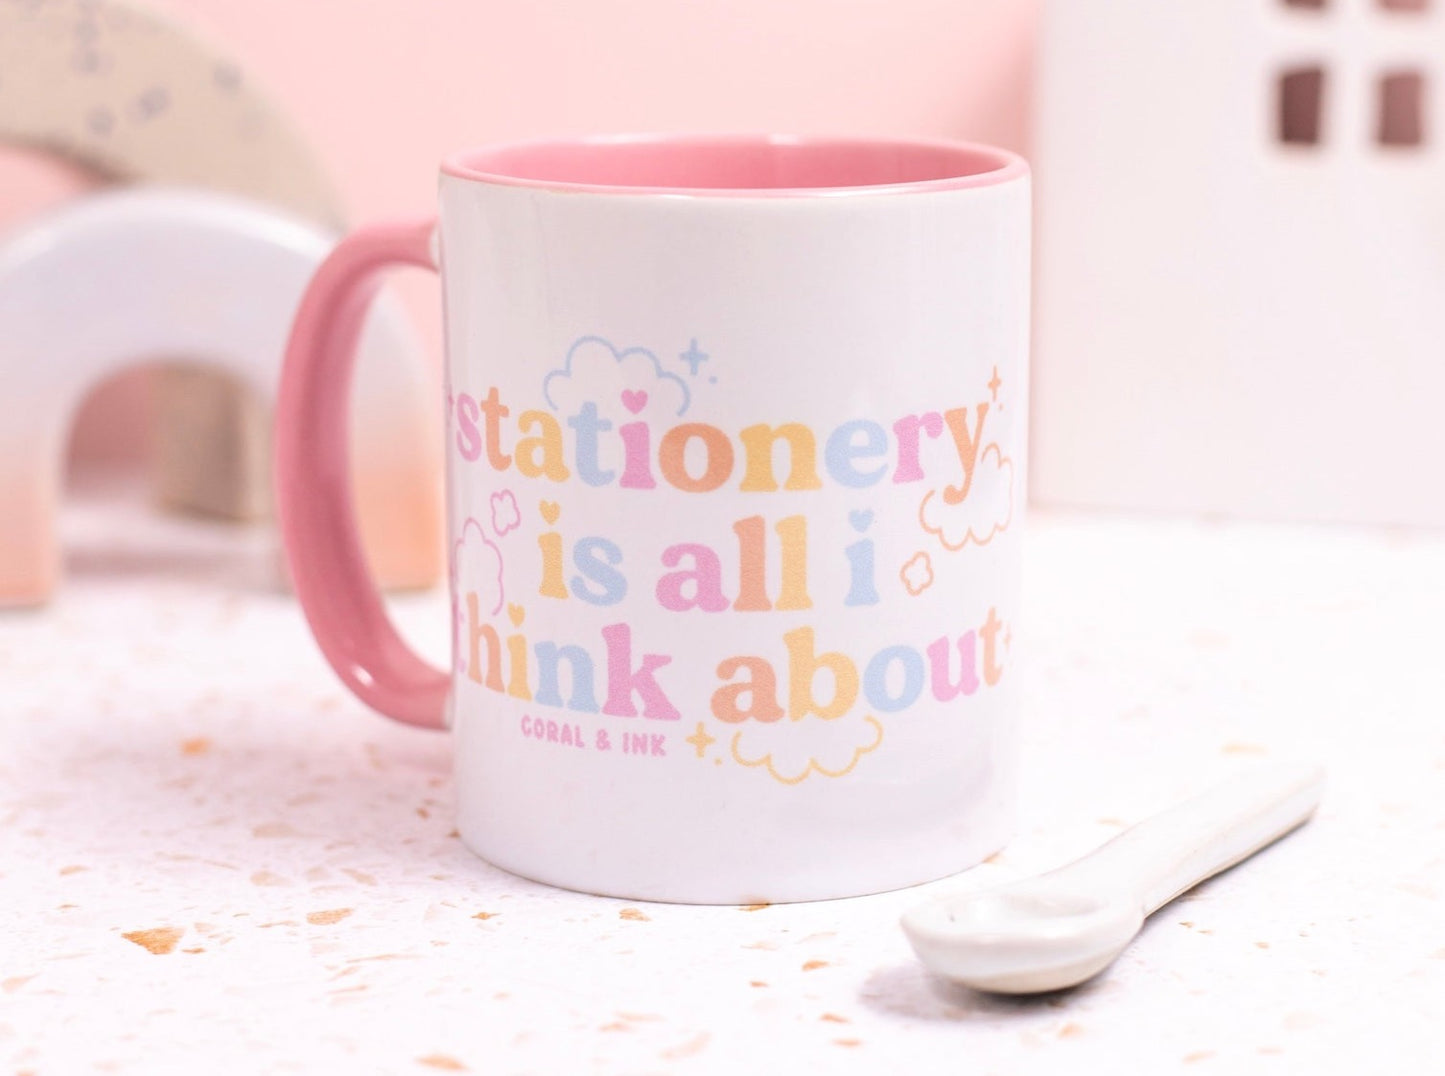 Stationery Is All I Think About Mug